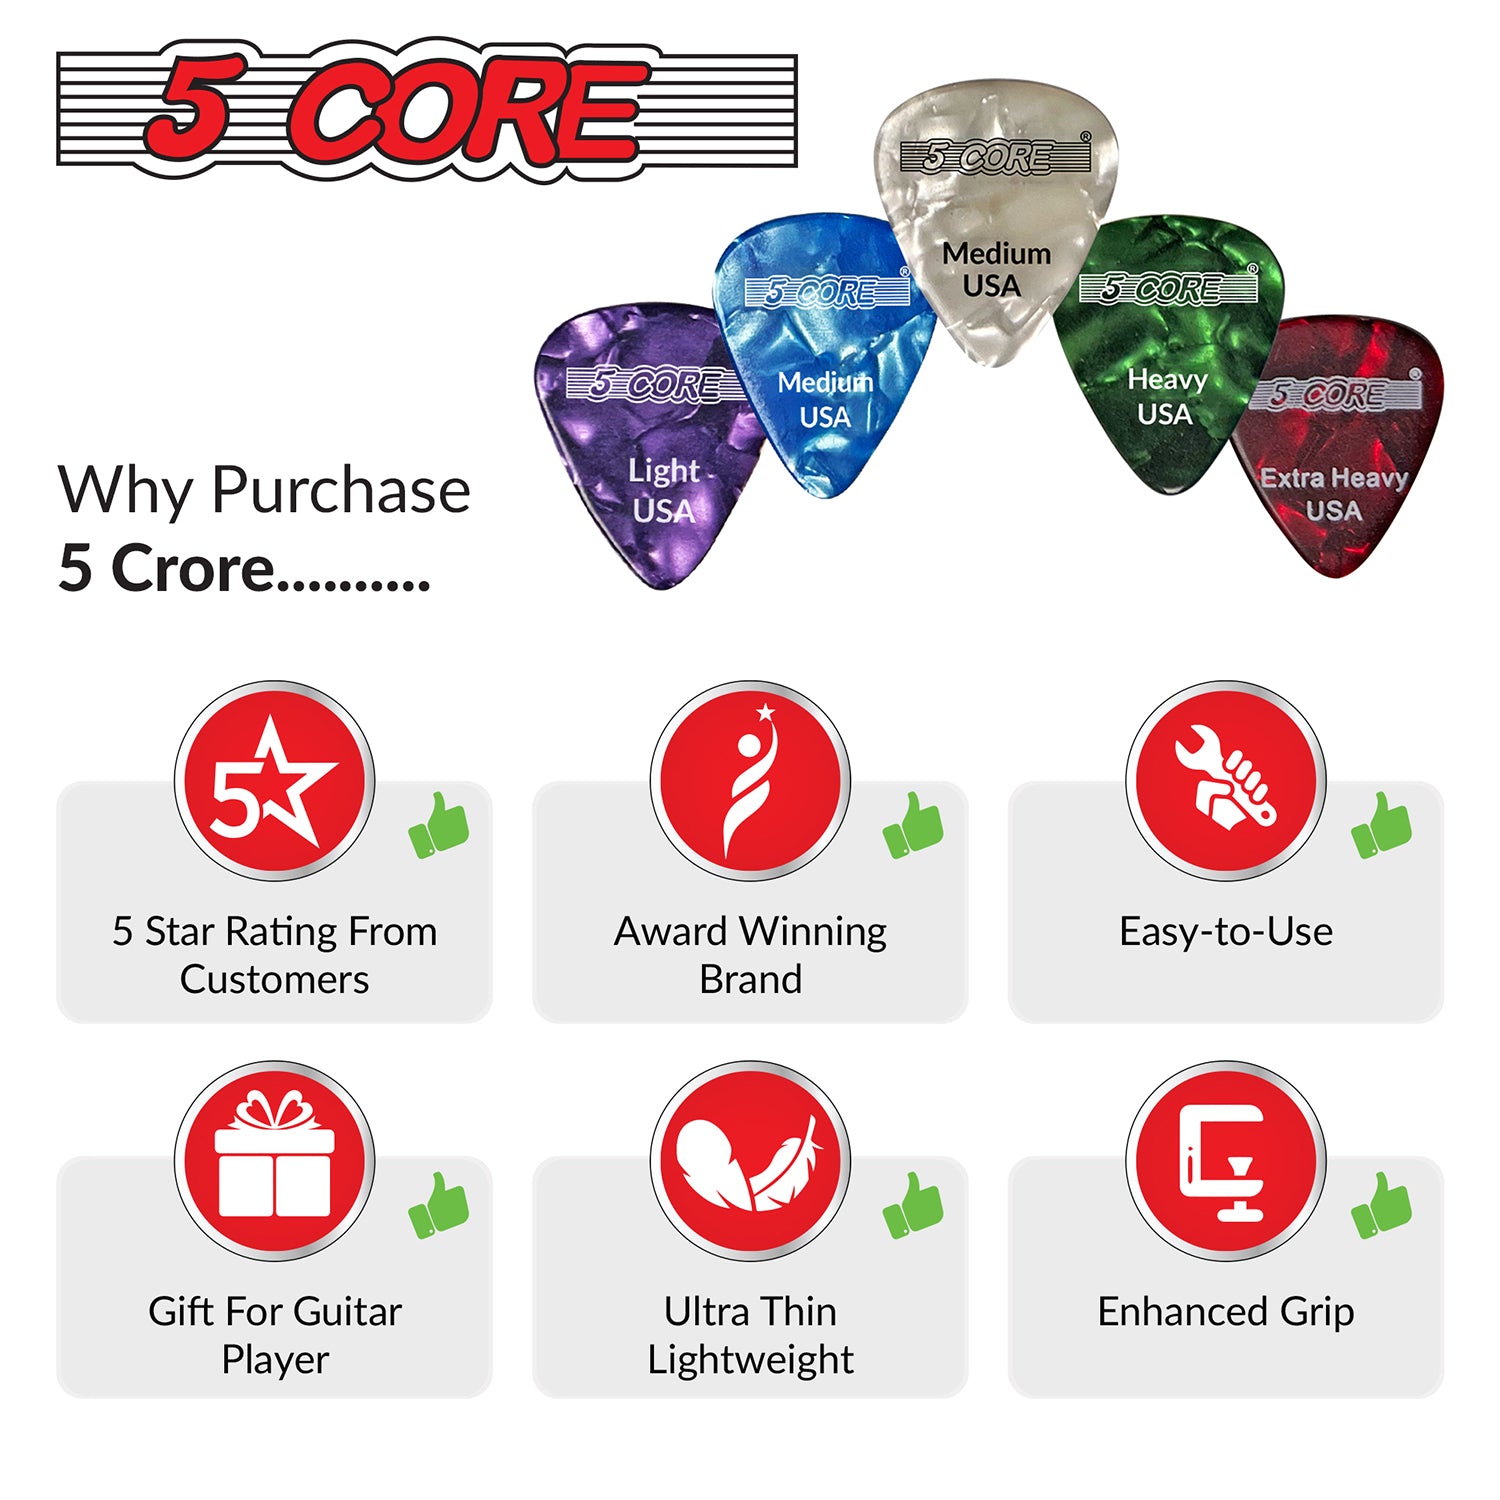 5 Core Celluloid Guitar Picks 96 Pack Green Light Medium Heavy Extra Heavy Gauge Plectrums for Acoustic Electric Bass Guitar